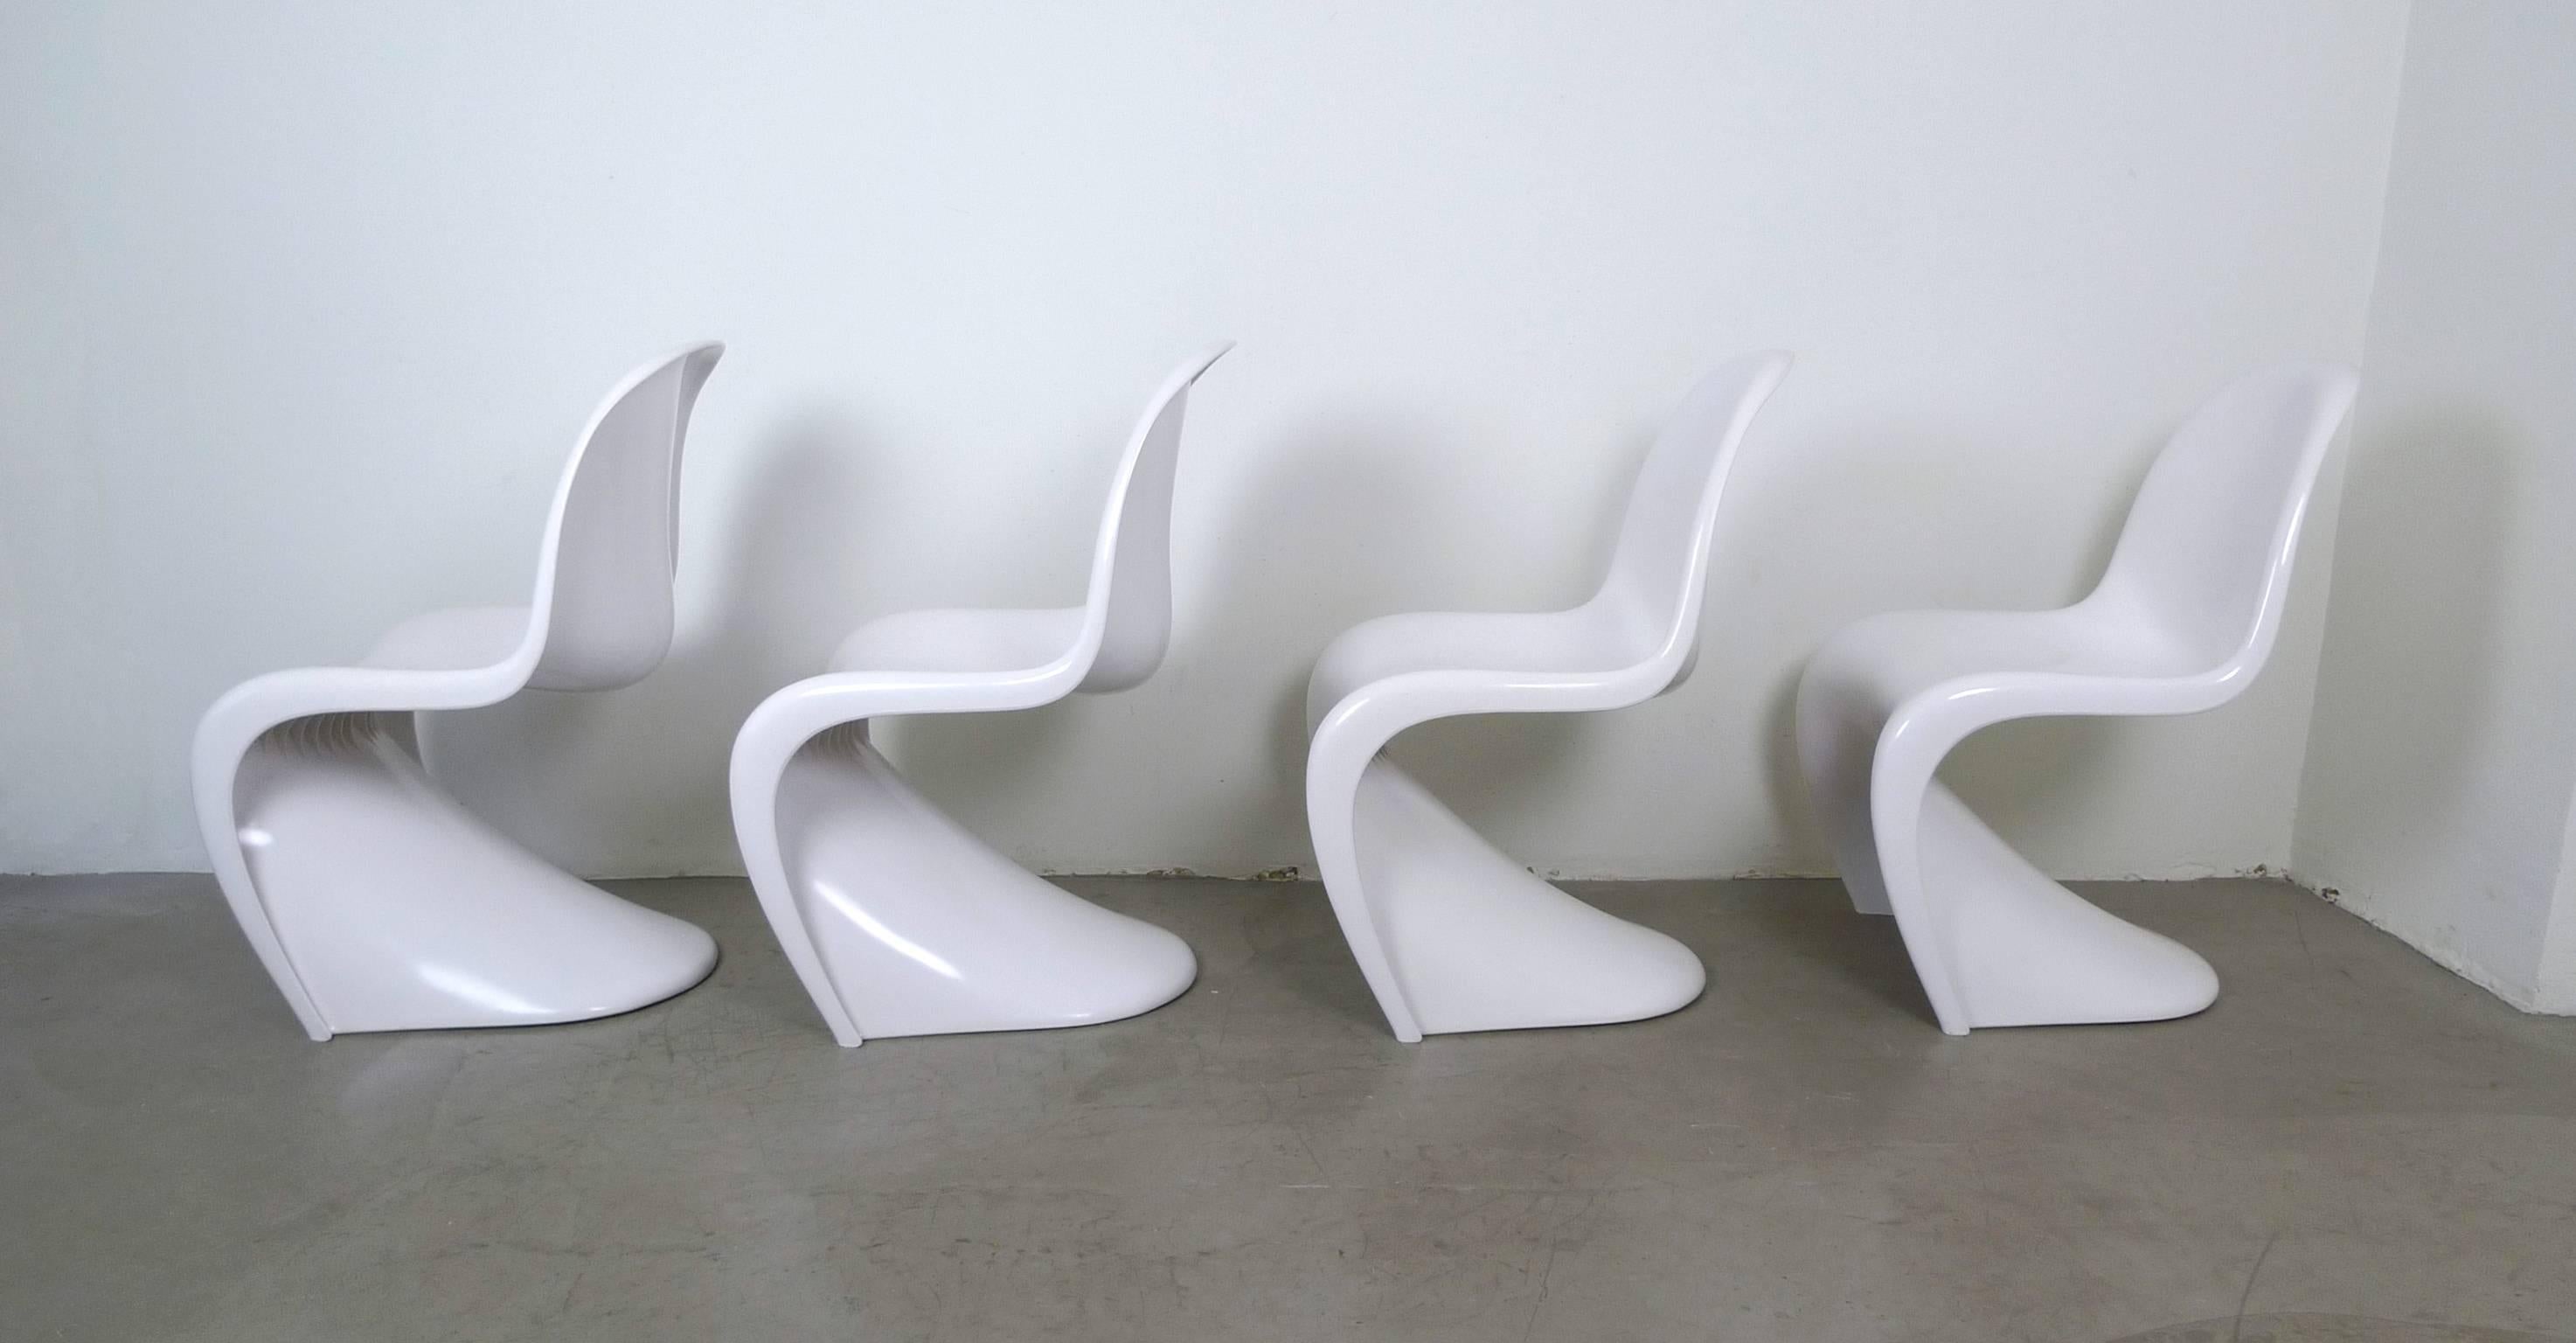 Space Age Set of Four White Panton Chairs by Verner Panton for Fehlbaum, Germany, 1971 For Sale